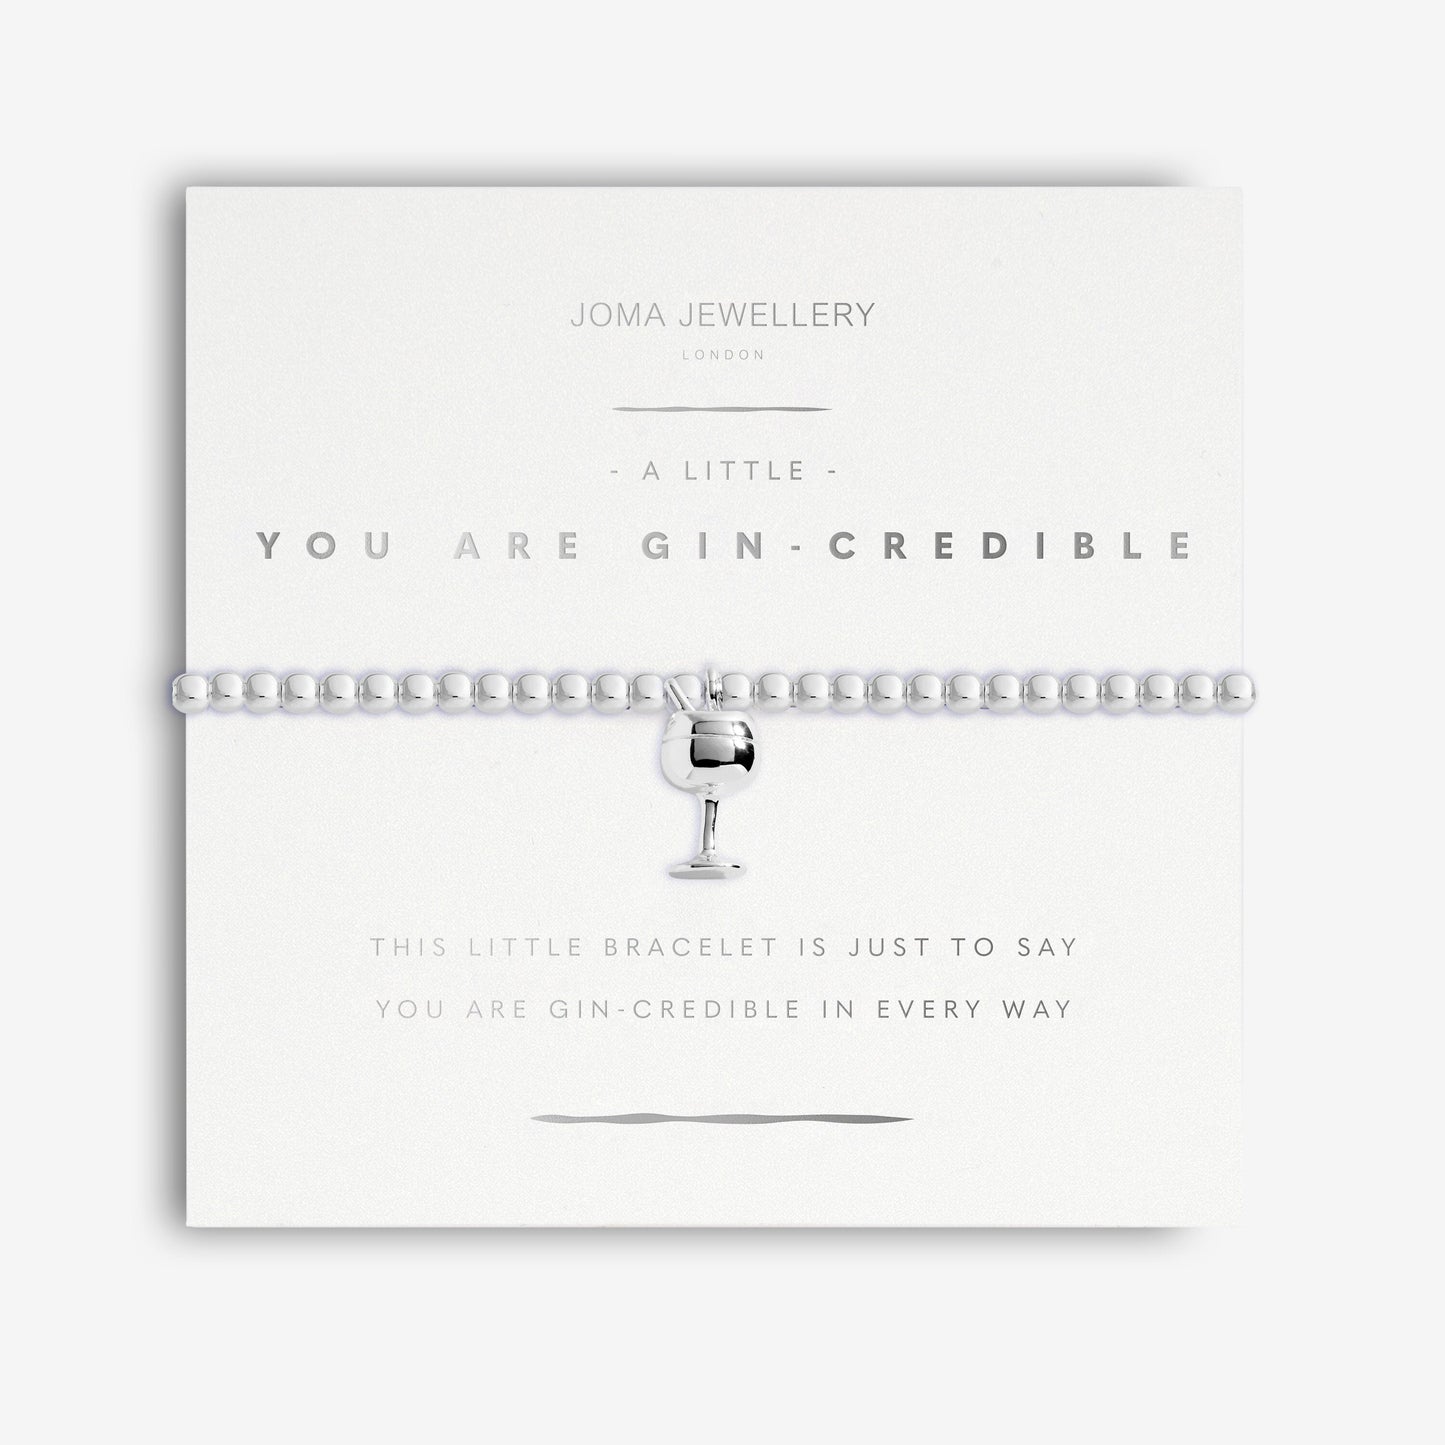 RADIANCE A LITTLE 'YOU ARE GIN-CREDIBLE' BRACELET